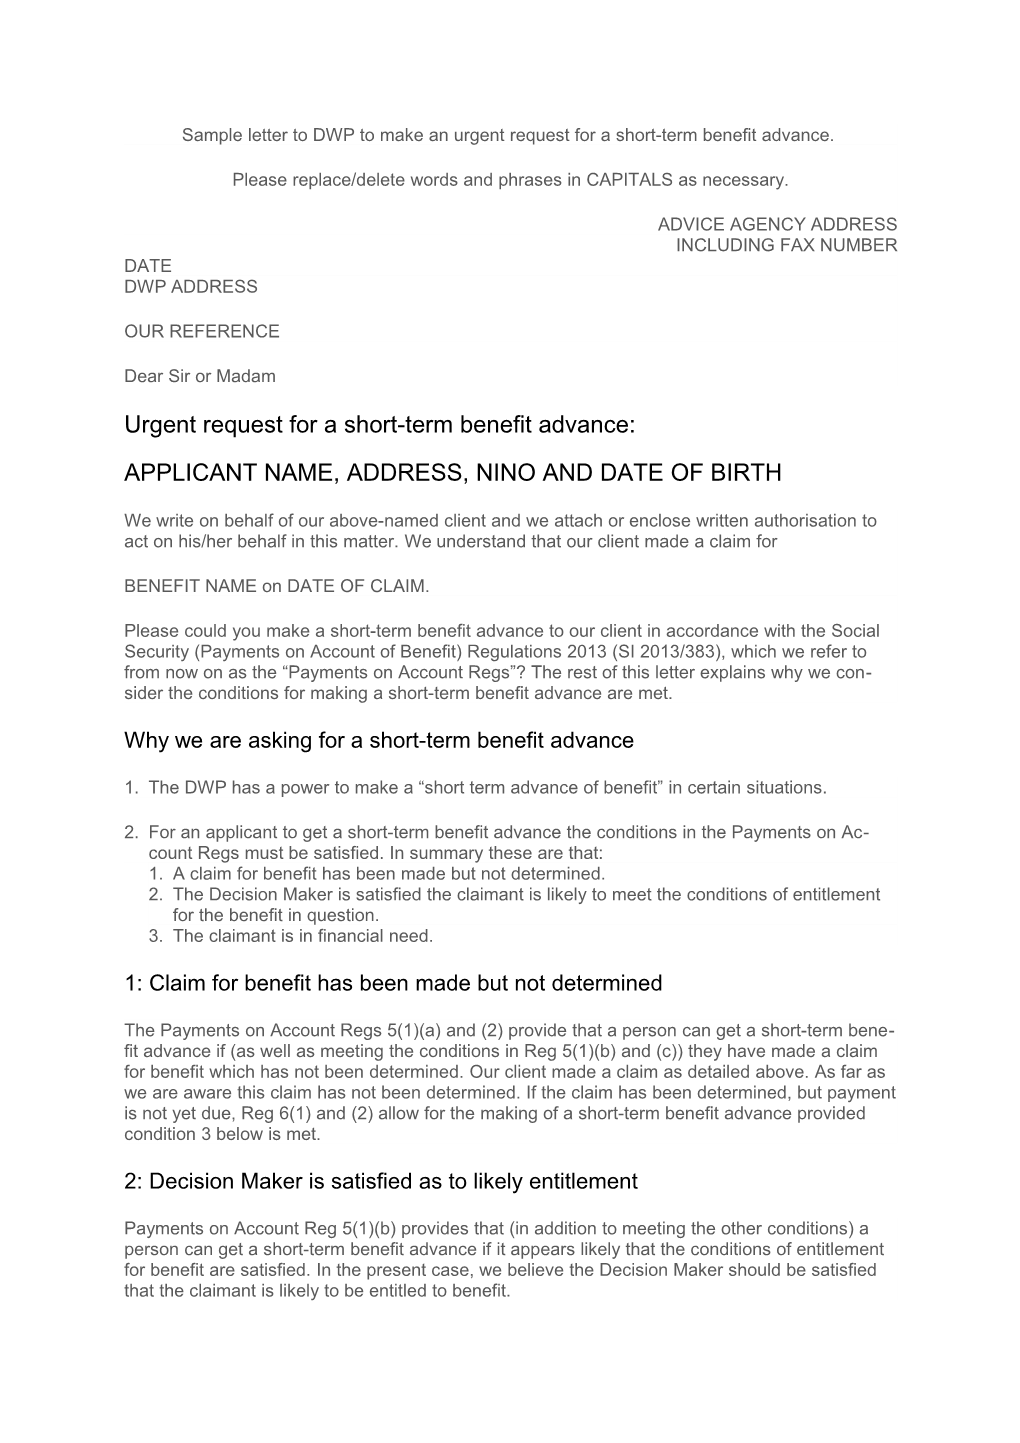 Sample Letter to DWP to Make an Urgent Request for a Short-Term Benefit Advance